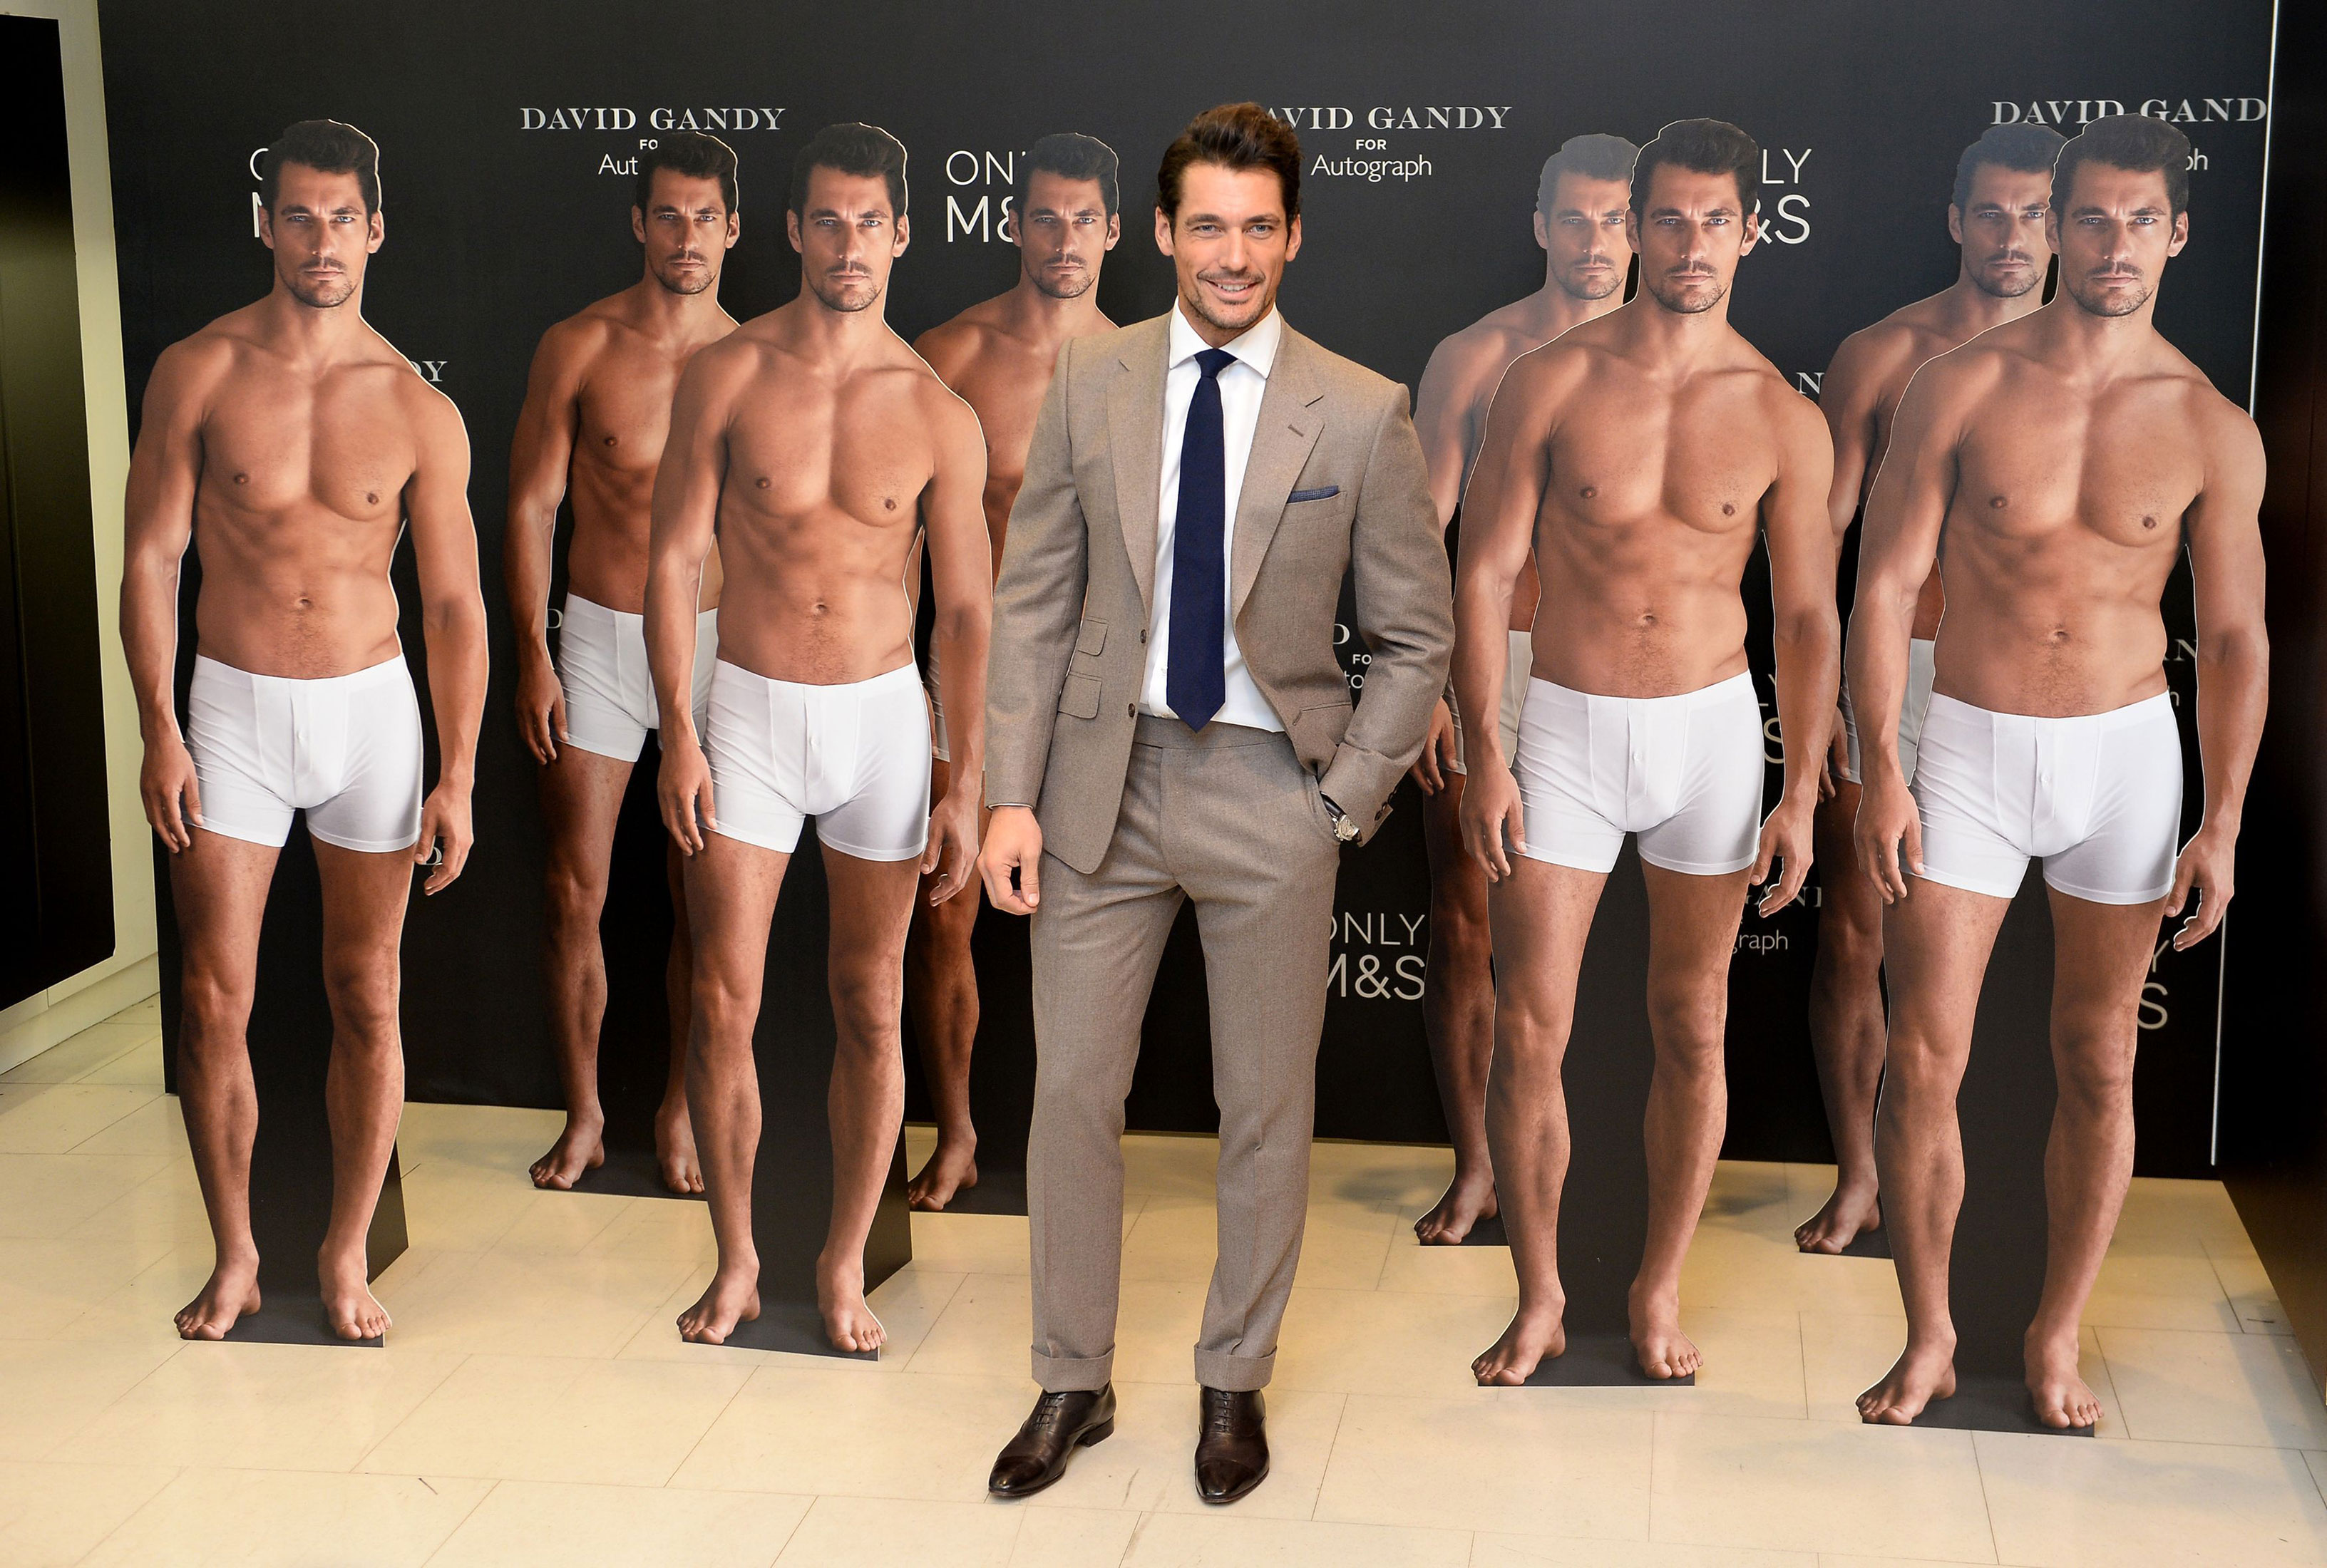 The full brief: how to buy men's underwear that will last the